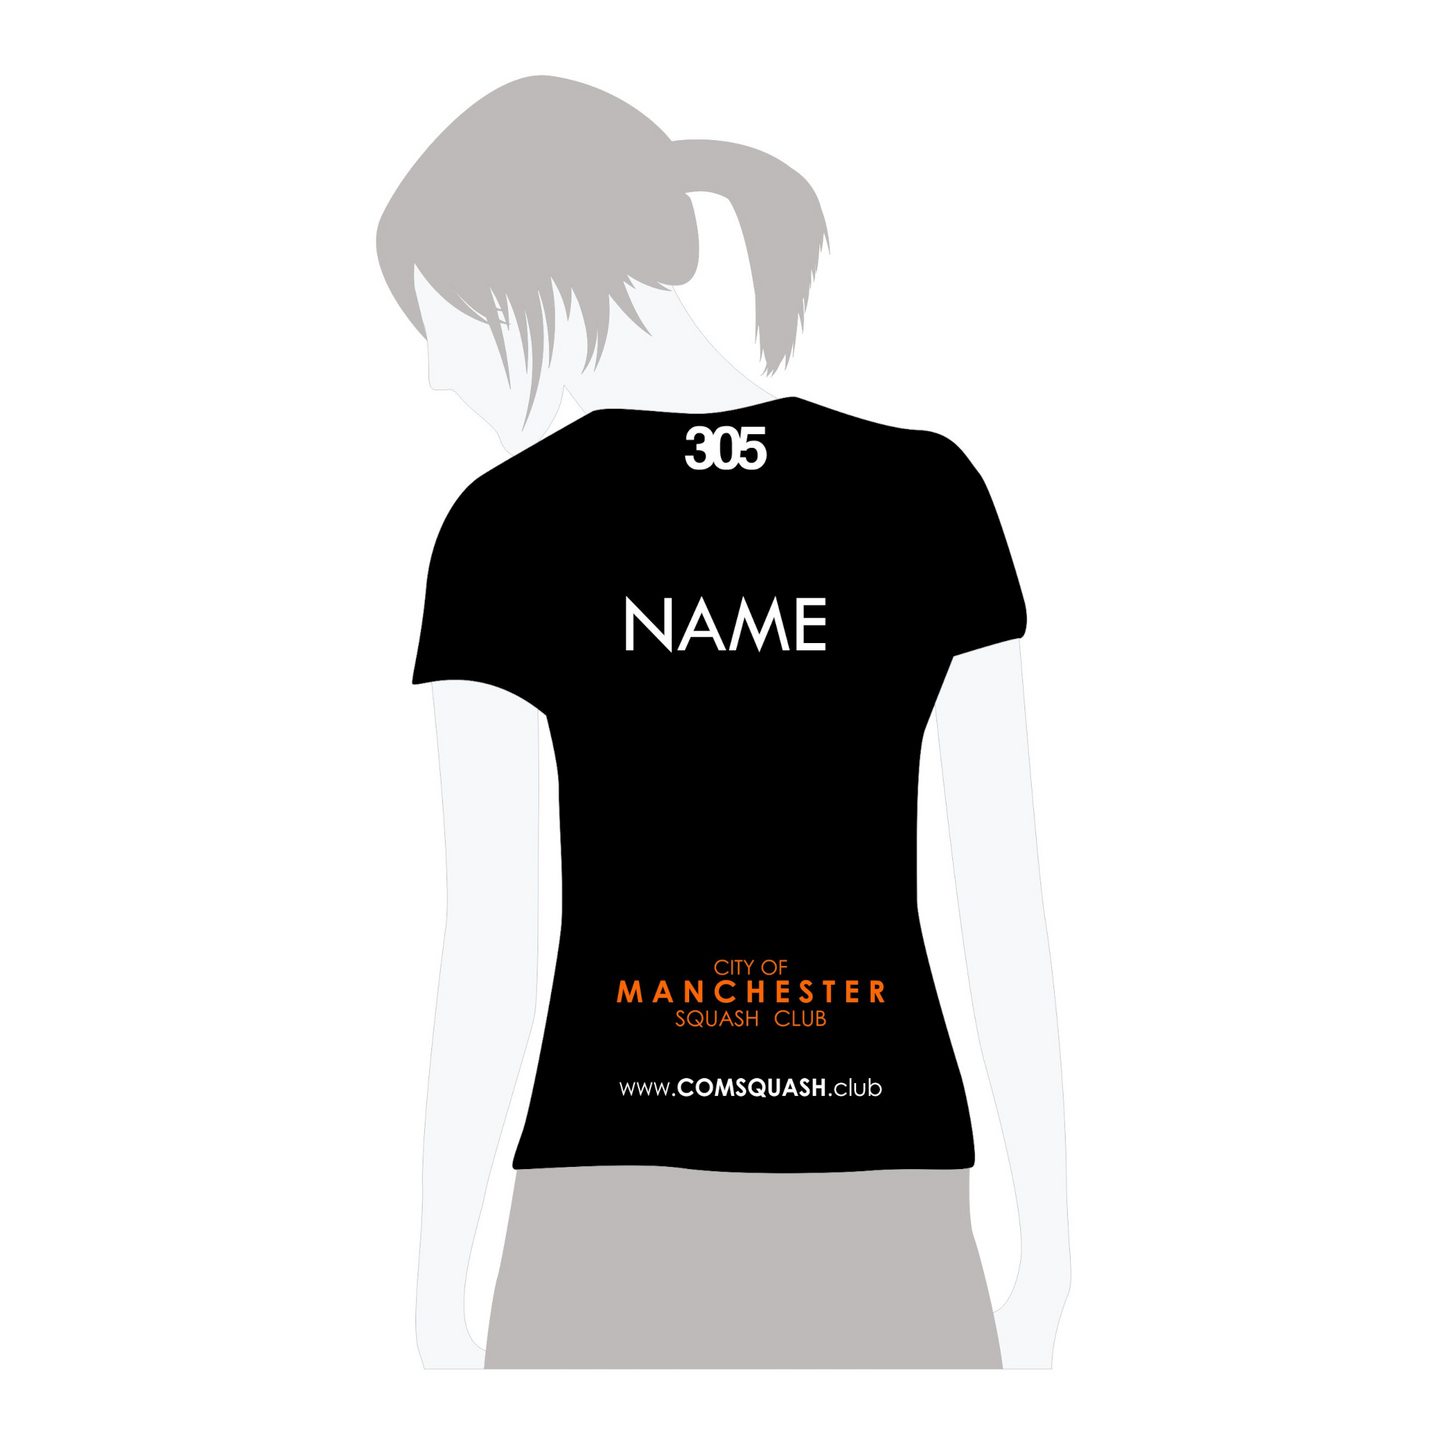 City of Manchester Squash Action Womens T